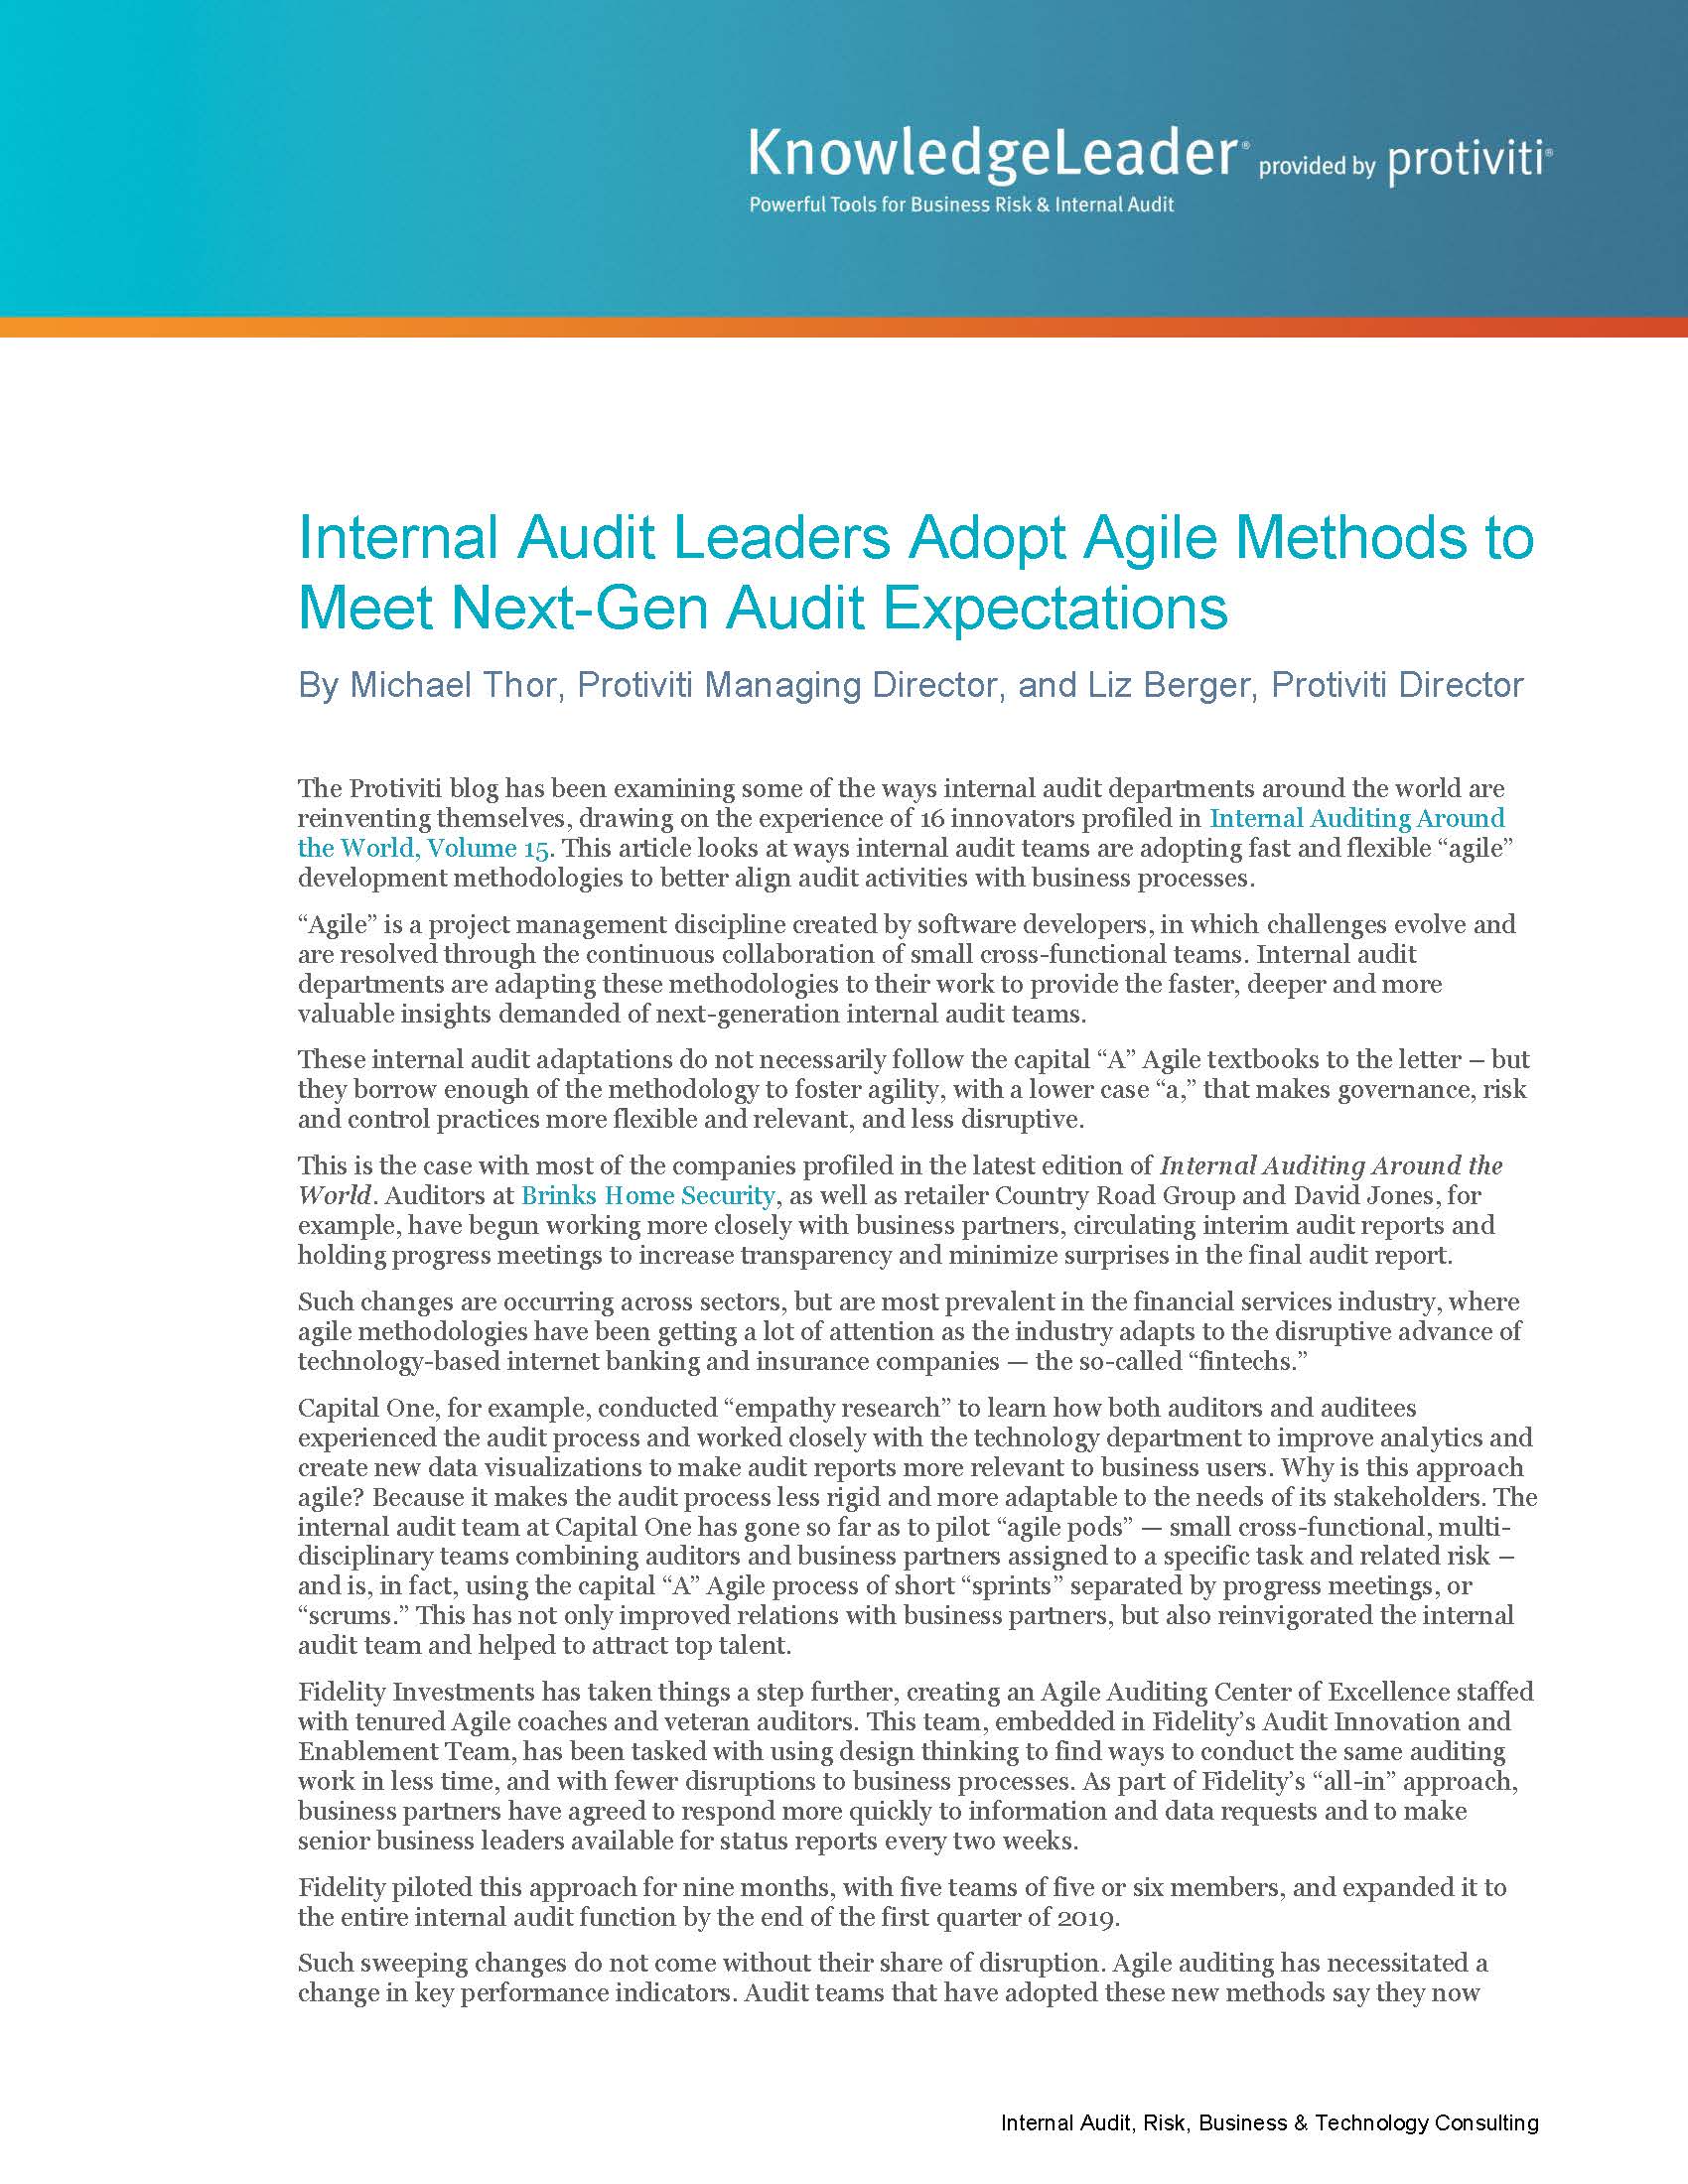 Screenshot of the first page of Internal Audit Leaders Adopt Agile Methods to Meet Next-Gen Audit Expectations